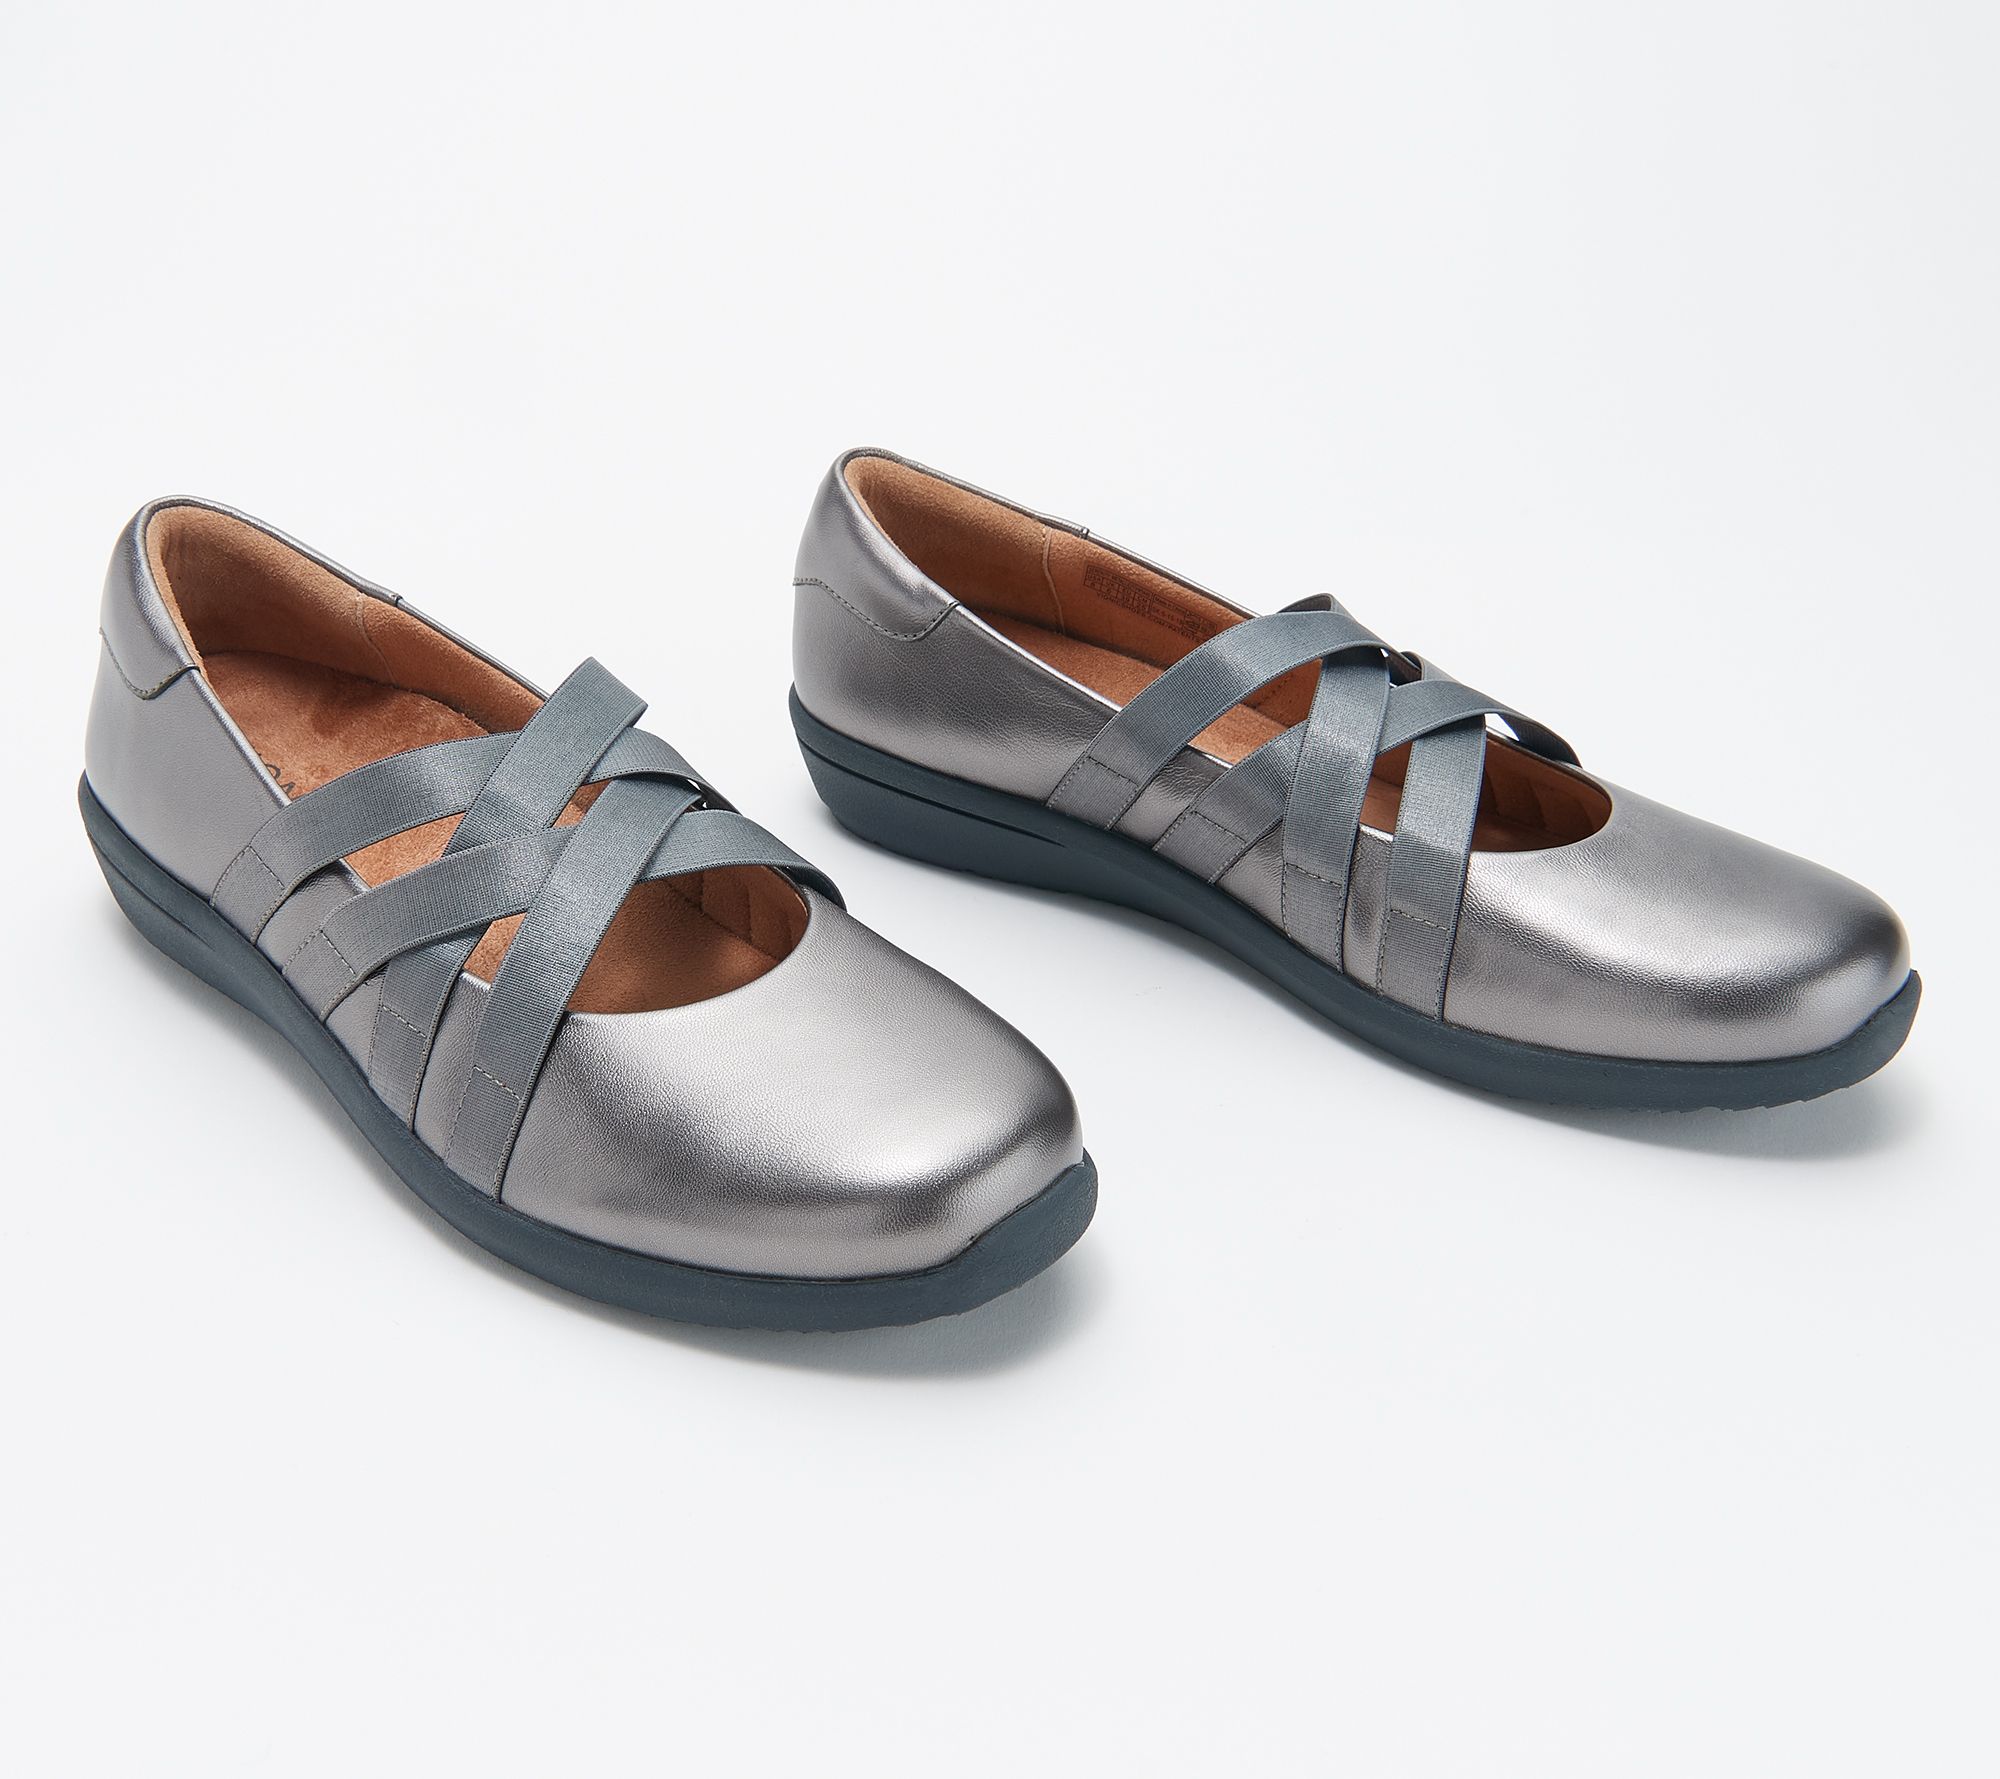 Vionic Leather or Metallic Mary Janes 